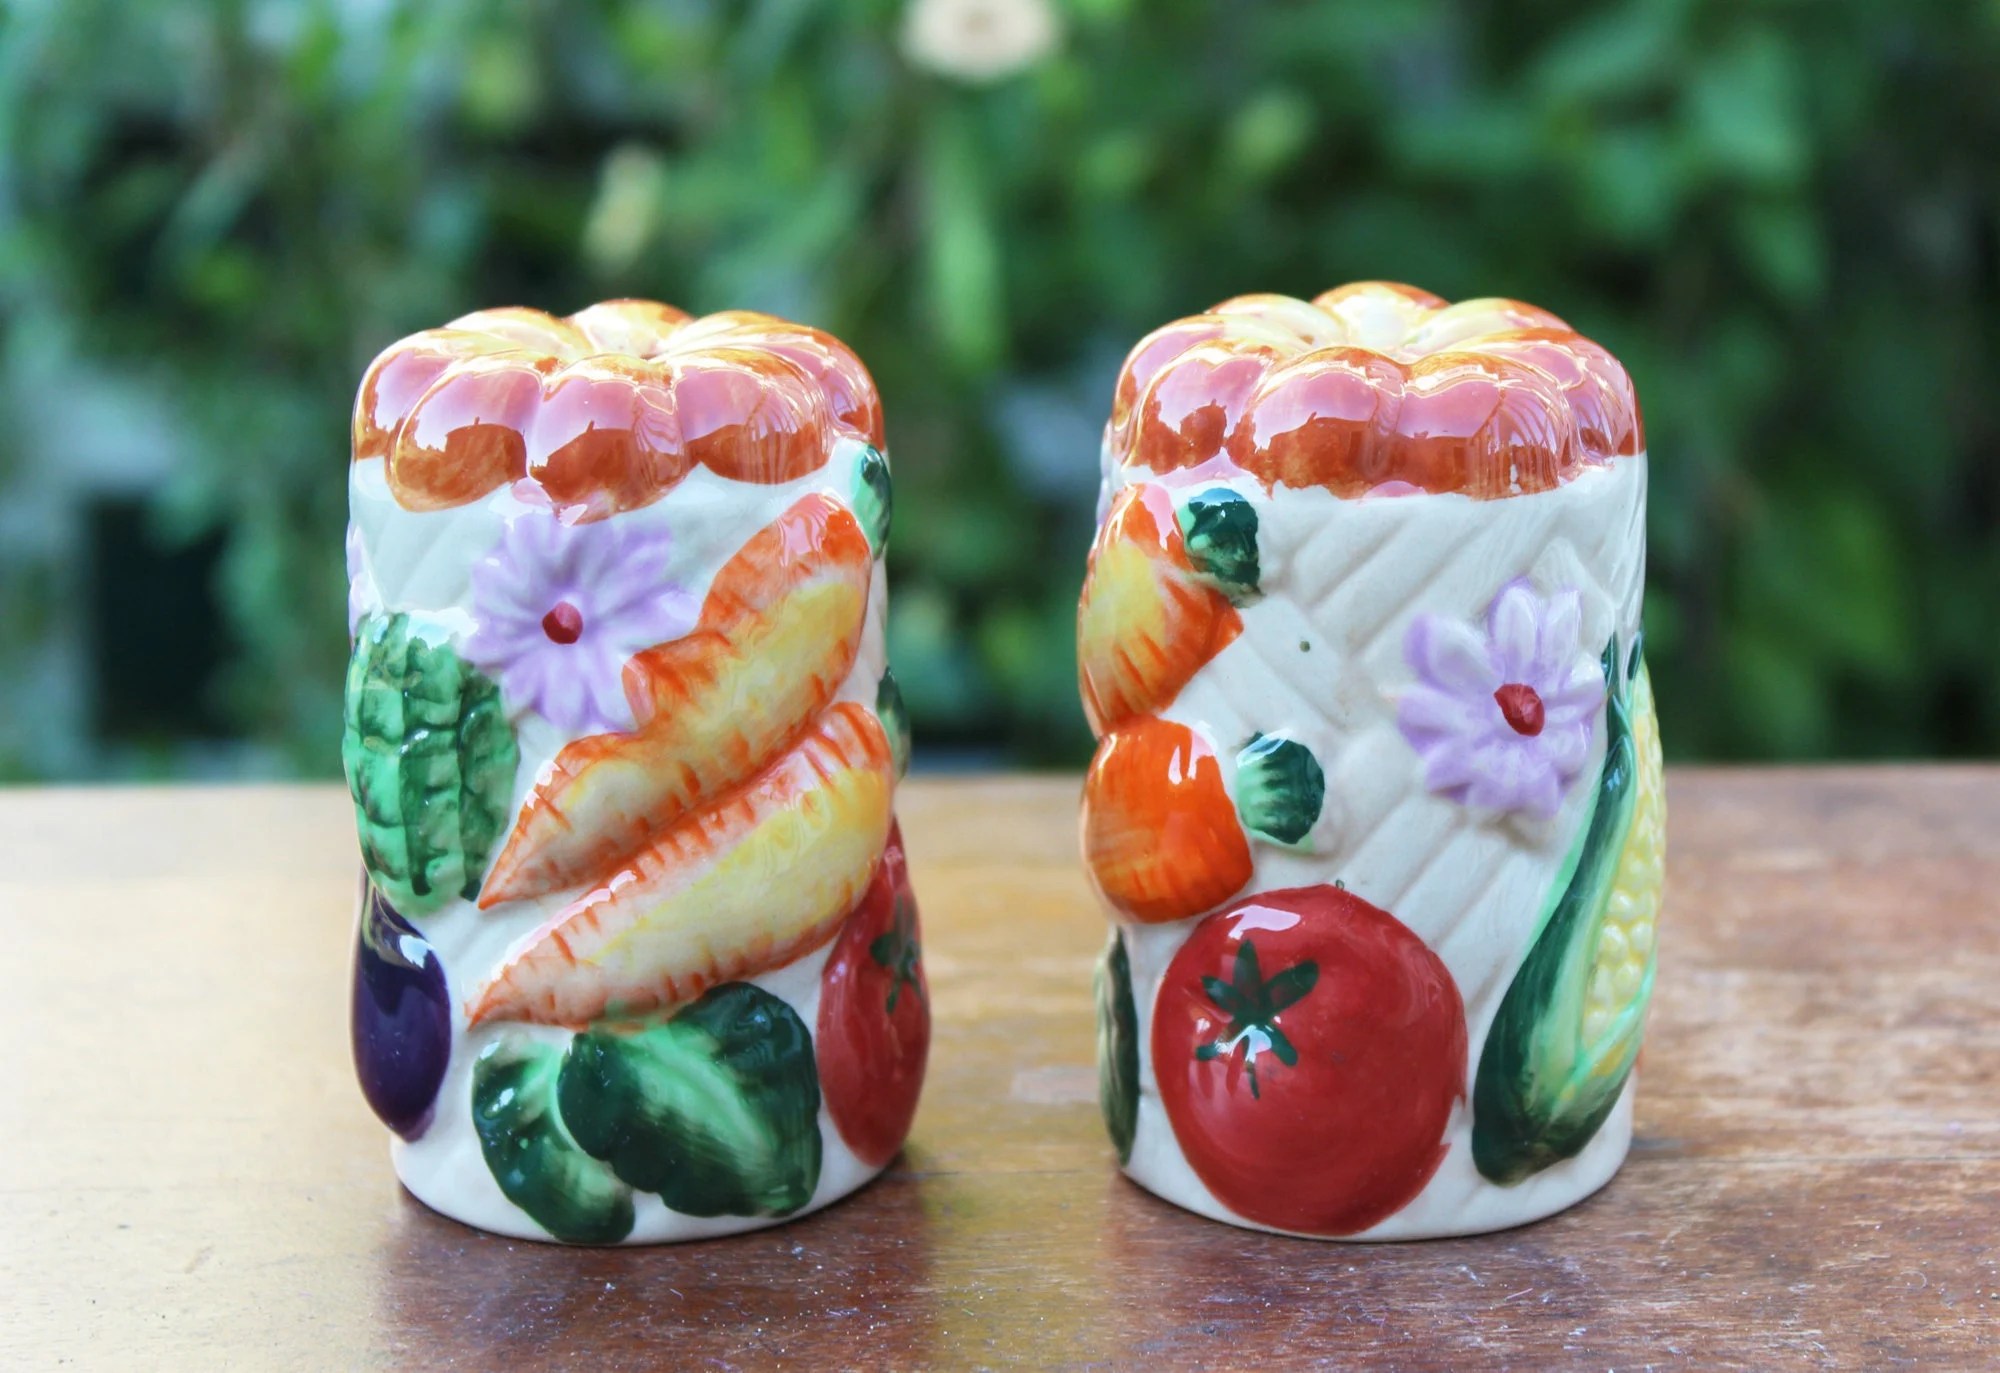 Vintage Vegetable Patch Ceramic Salt and Pepper Spice S&P Shakers - Veggies, Veg, Fall, Table Decor - Farmhouse, Country, Cottage